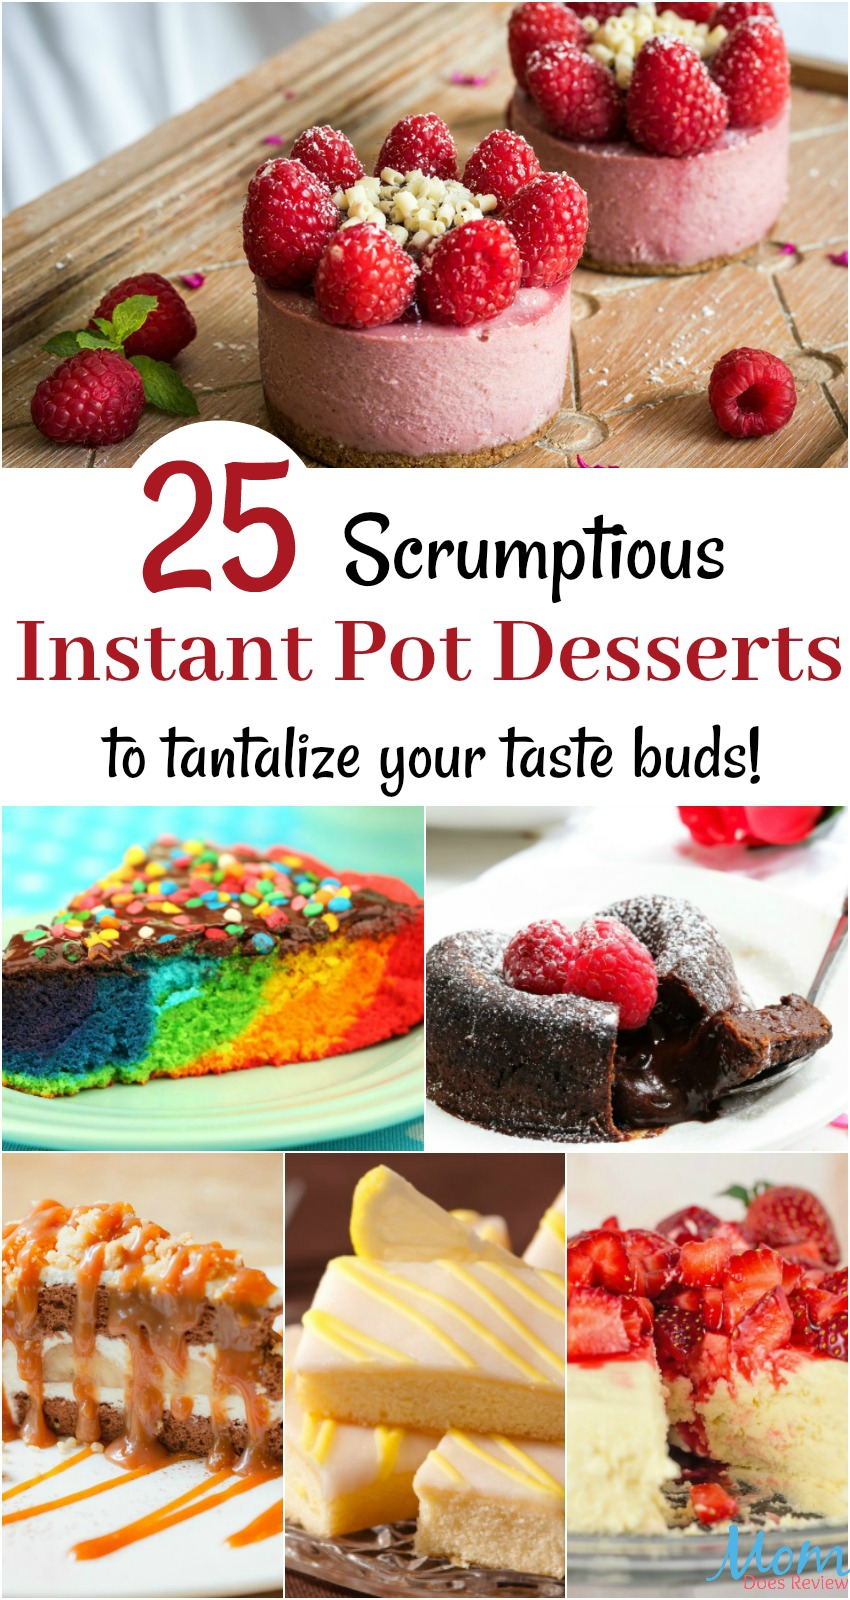 25 Scrumptious Instant Pot Dessert Recipes to Tantalize Your Taste Buds banner